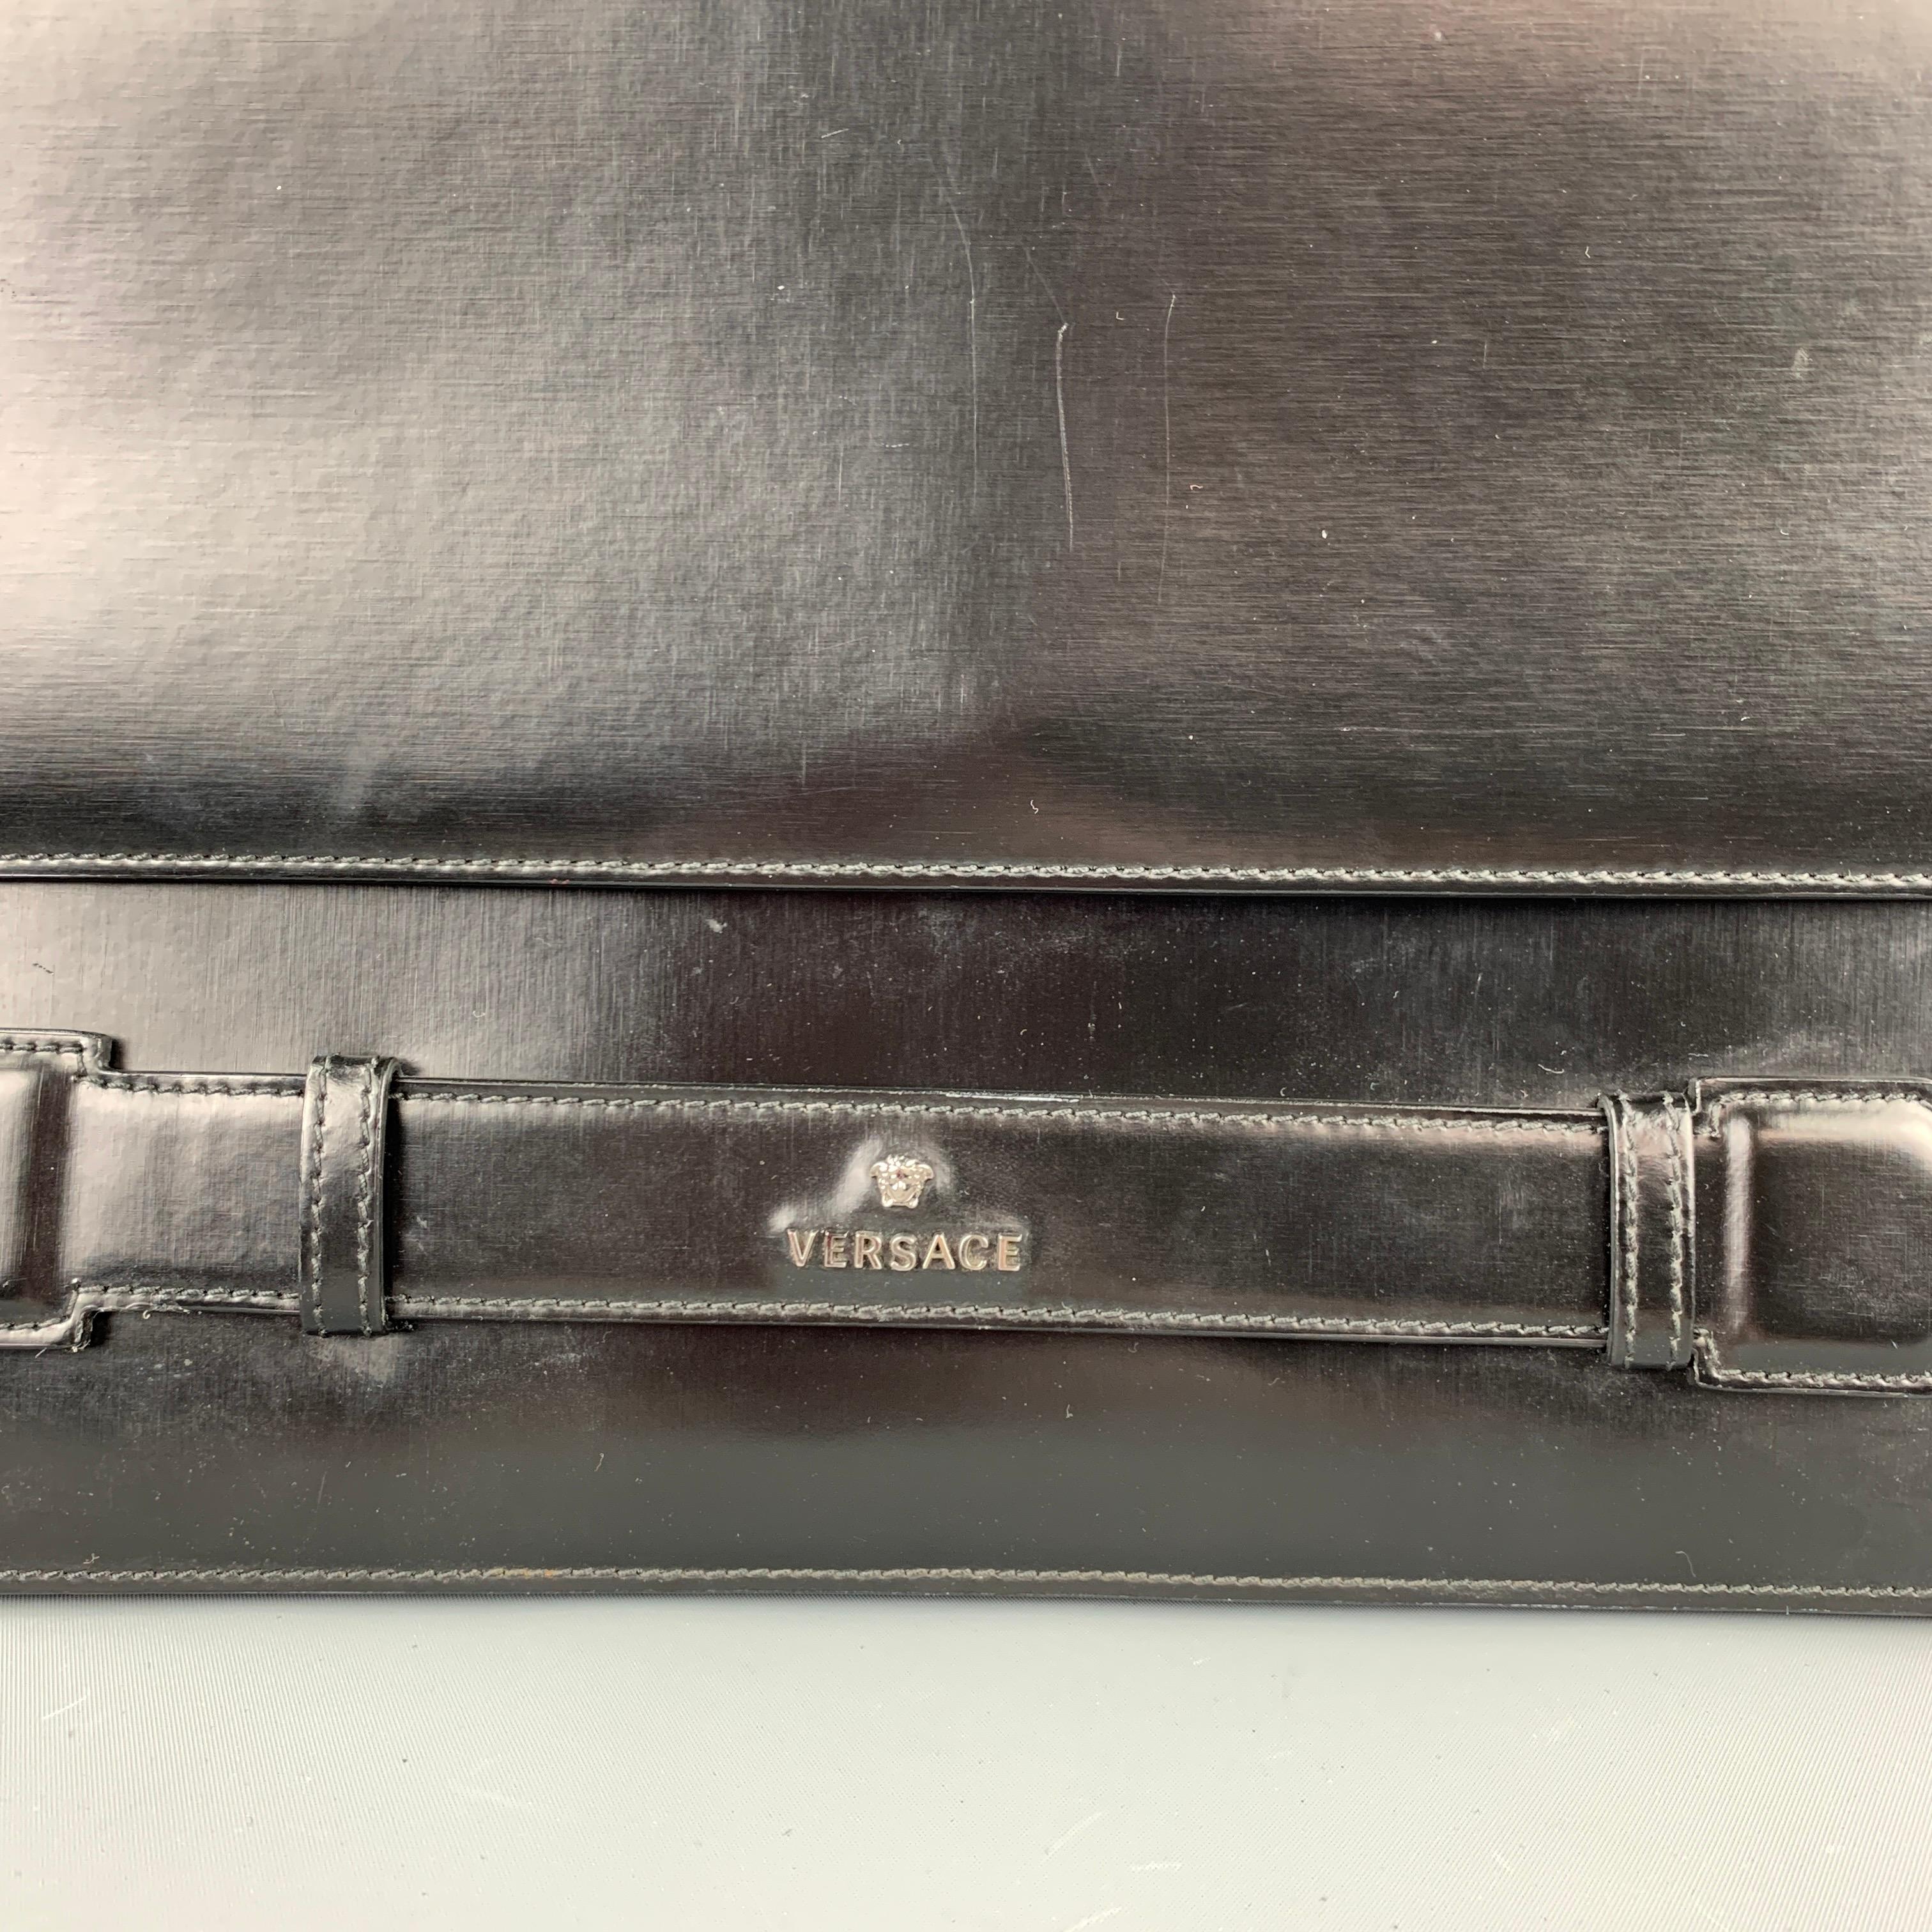 VERSACE bag comes in a black leather with a silver tone logo hardware detail featuring a envelope style, inner slots, and a snap button closure. Comes with a dust bag. Made in Italy.

Excellent Pre-Owned Condition.
Original Retail Price: